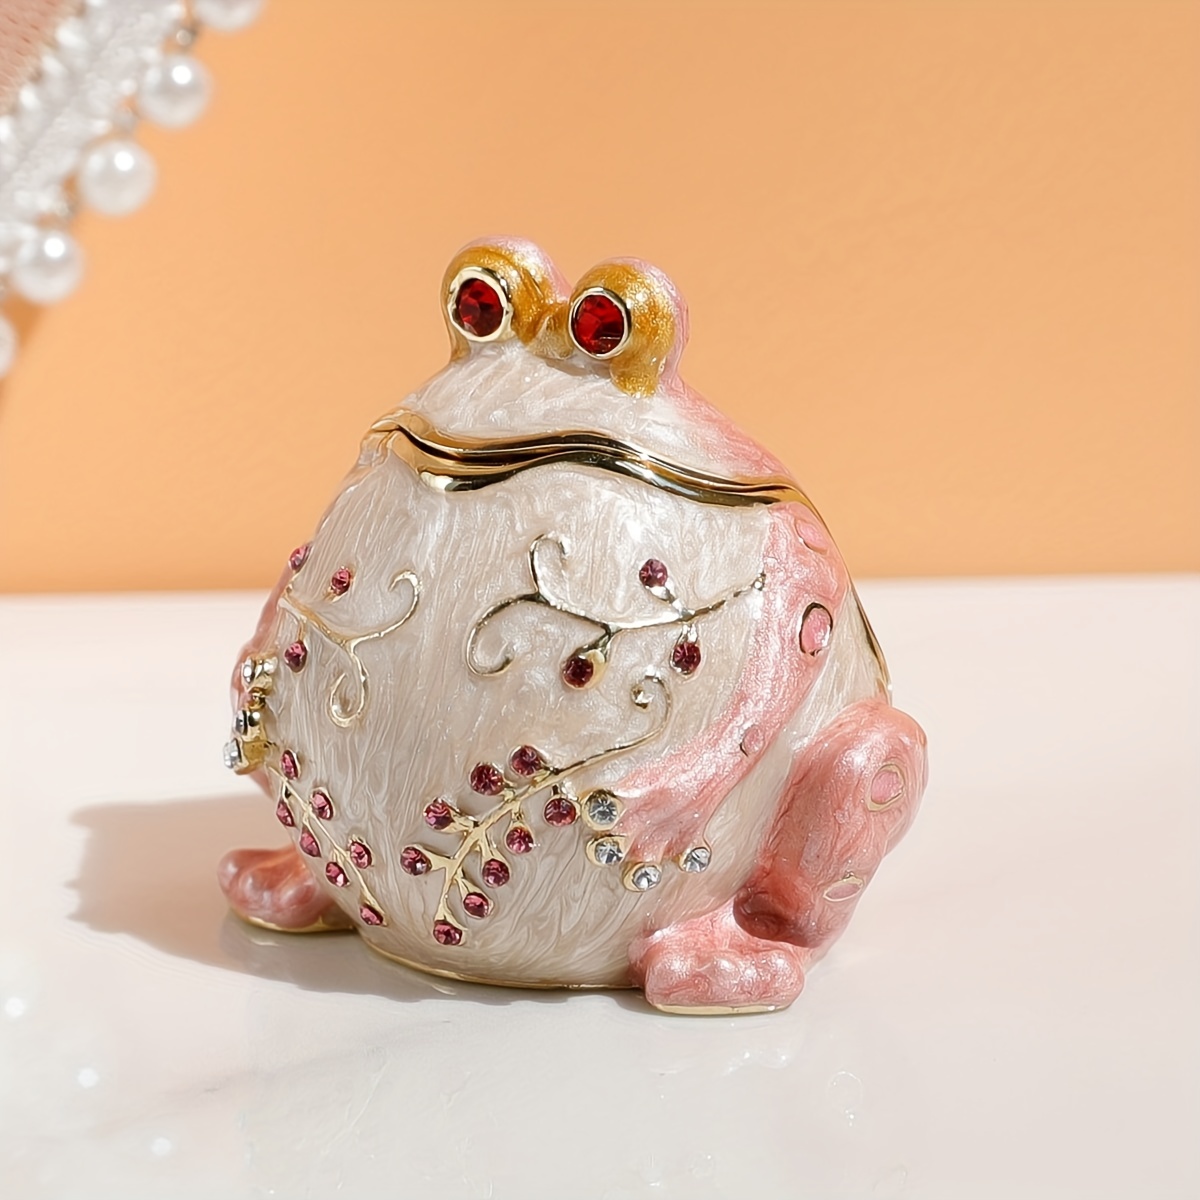 

Hand Painted Frog Trinket Box, Hinged Enameled Jewelry Box, Unique Mini Ring Earrings Jewelry Organizer, Vintage Bejeweled Storage, Figurine Collectible Keepsake Home Decor